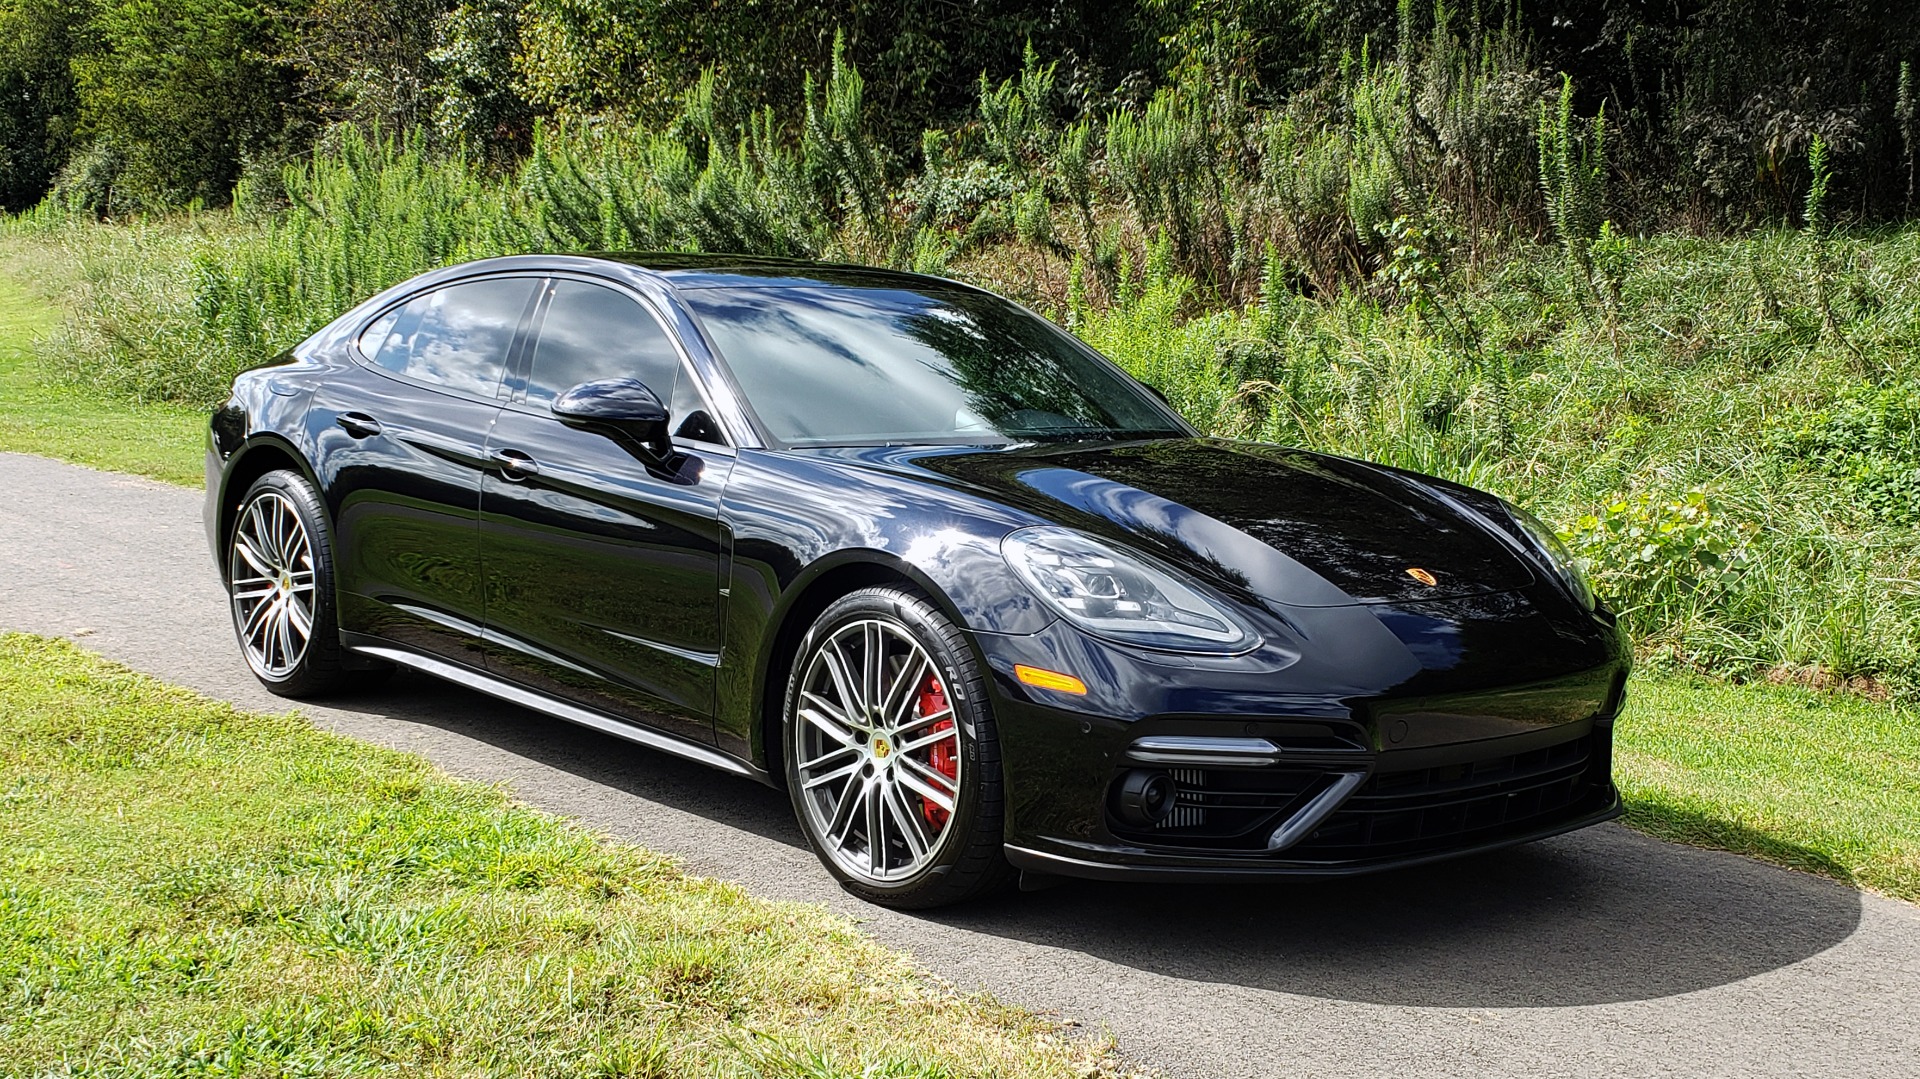 Used 2017 Porsche PANAMERA TURBO AWD / 4.0L V8 / AUTO / NAV / BOSE / REARVIEW / 21IN WHEELS for sale Sold at Formula Imports in Charlotte NC 28227 6